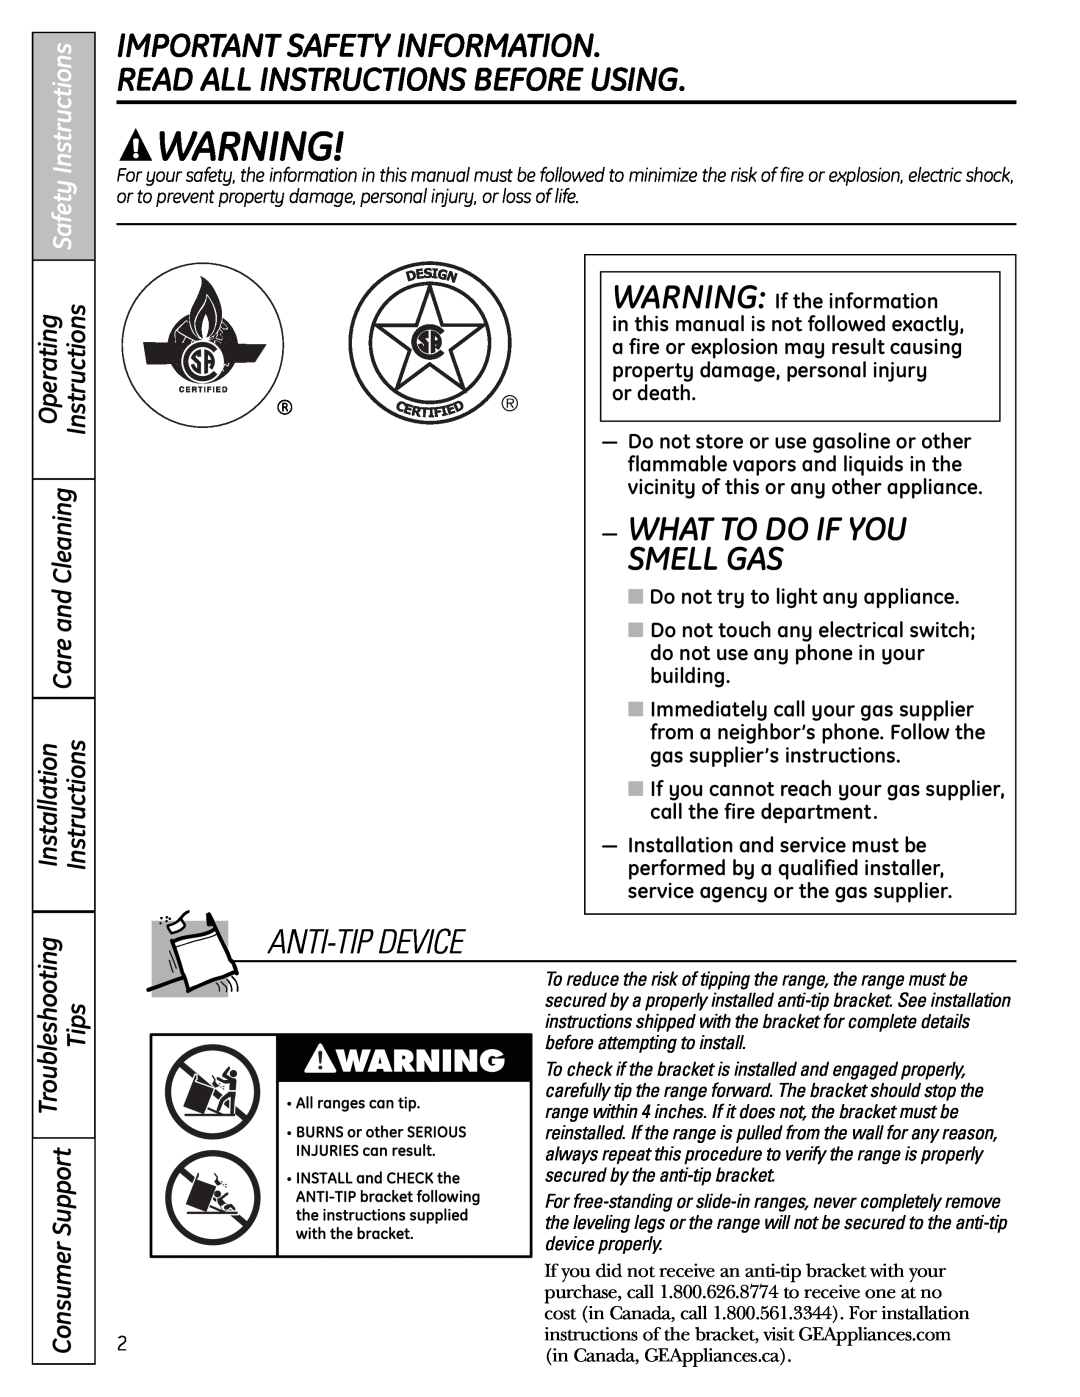 GE JGBS19 Important Safety Information Read All Instructions Before Using, What To Do If You Smell Gas, Anti-Tip Device 